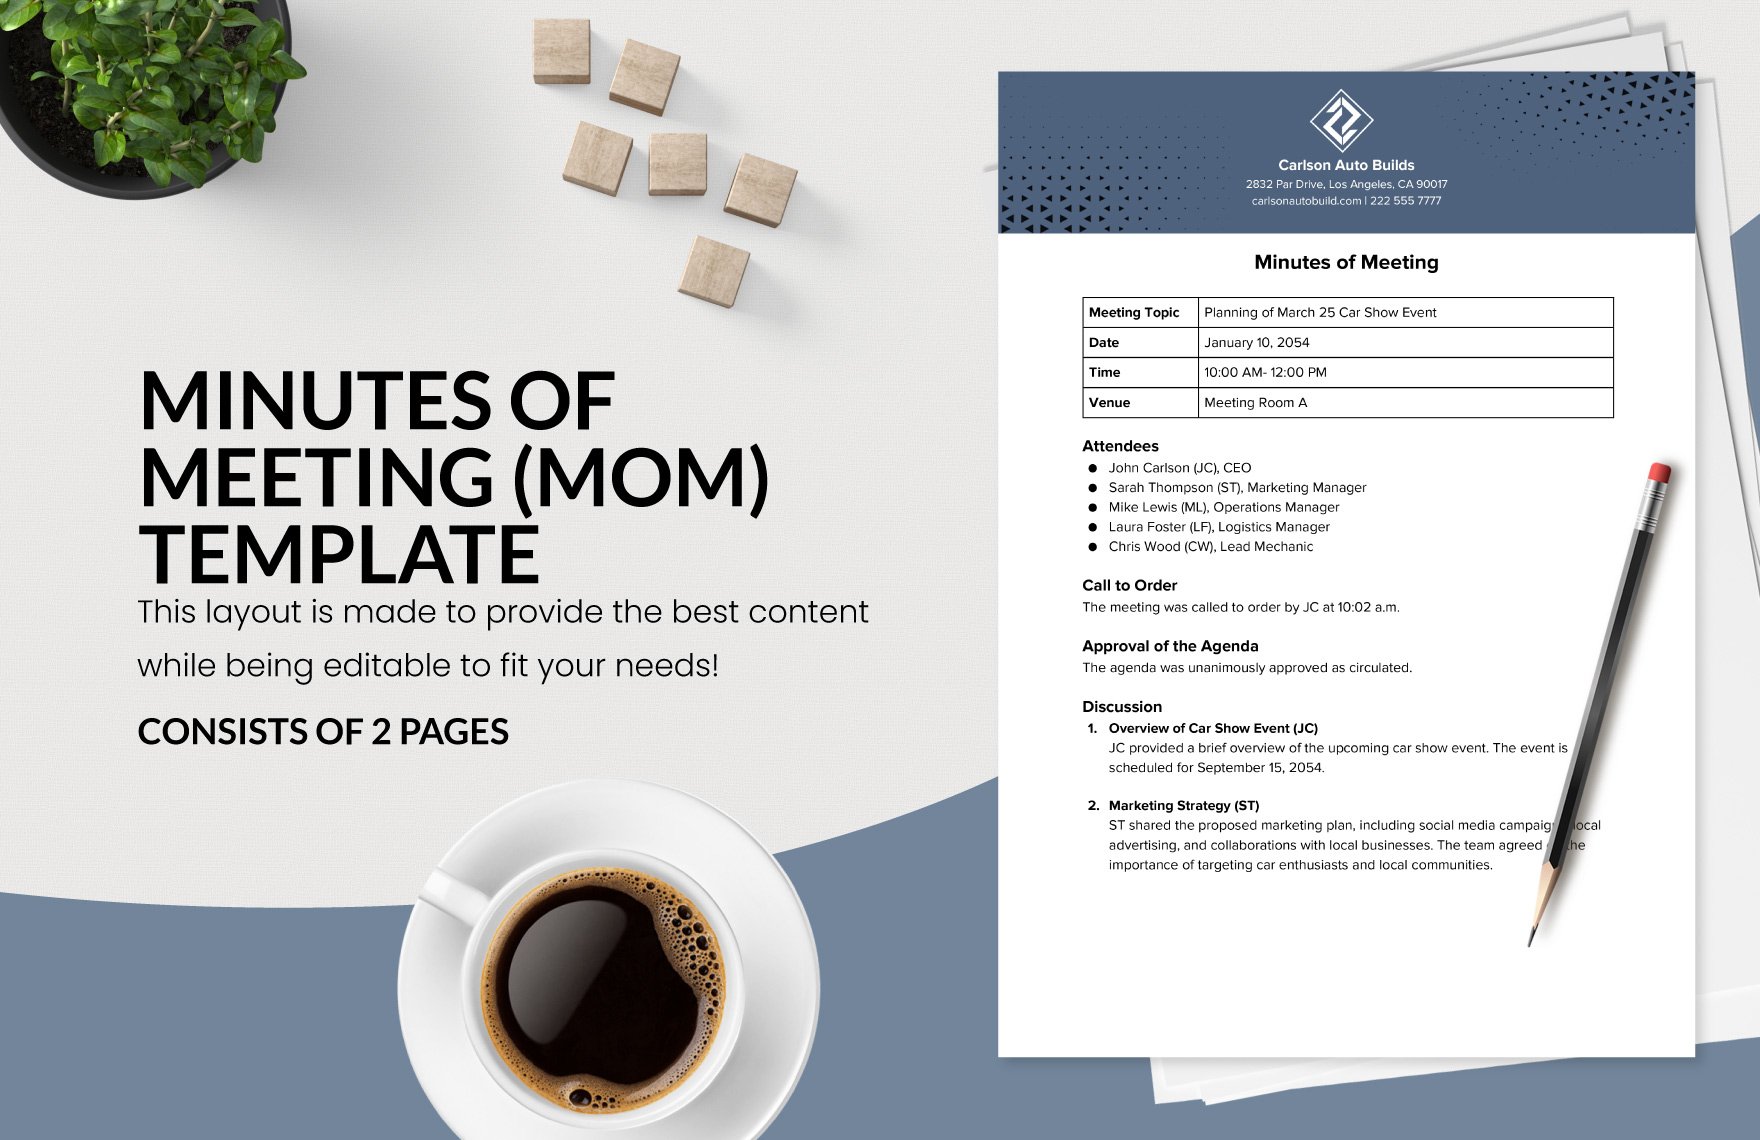 Minutes of Meeting (MoM) Template 